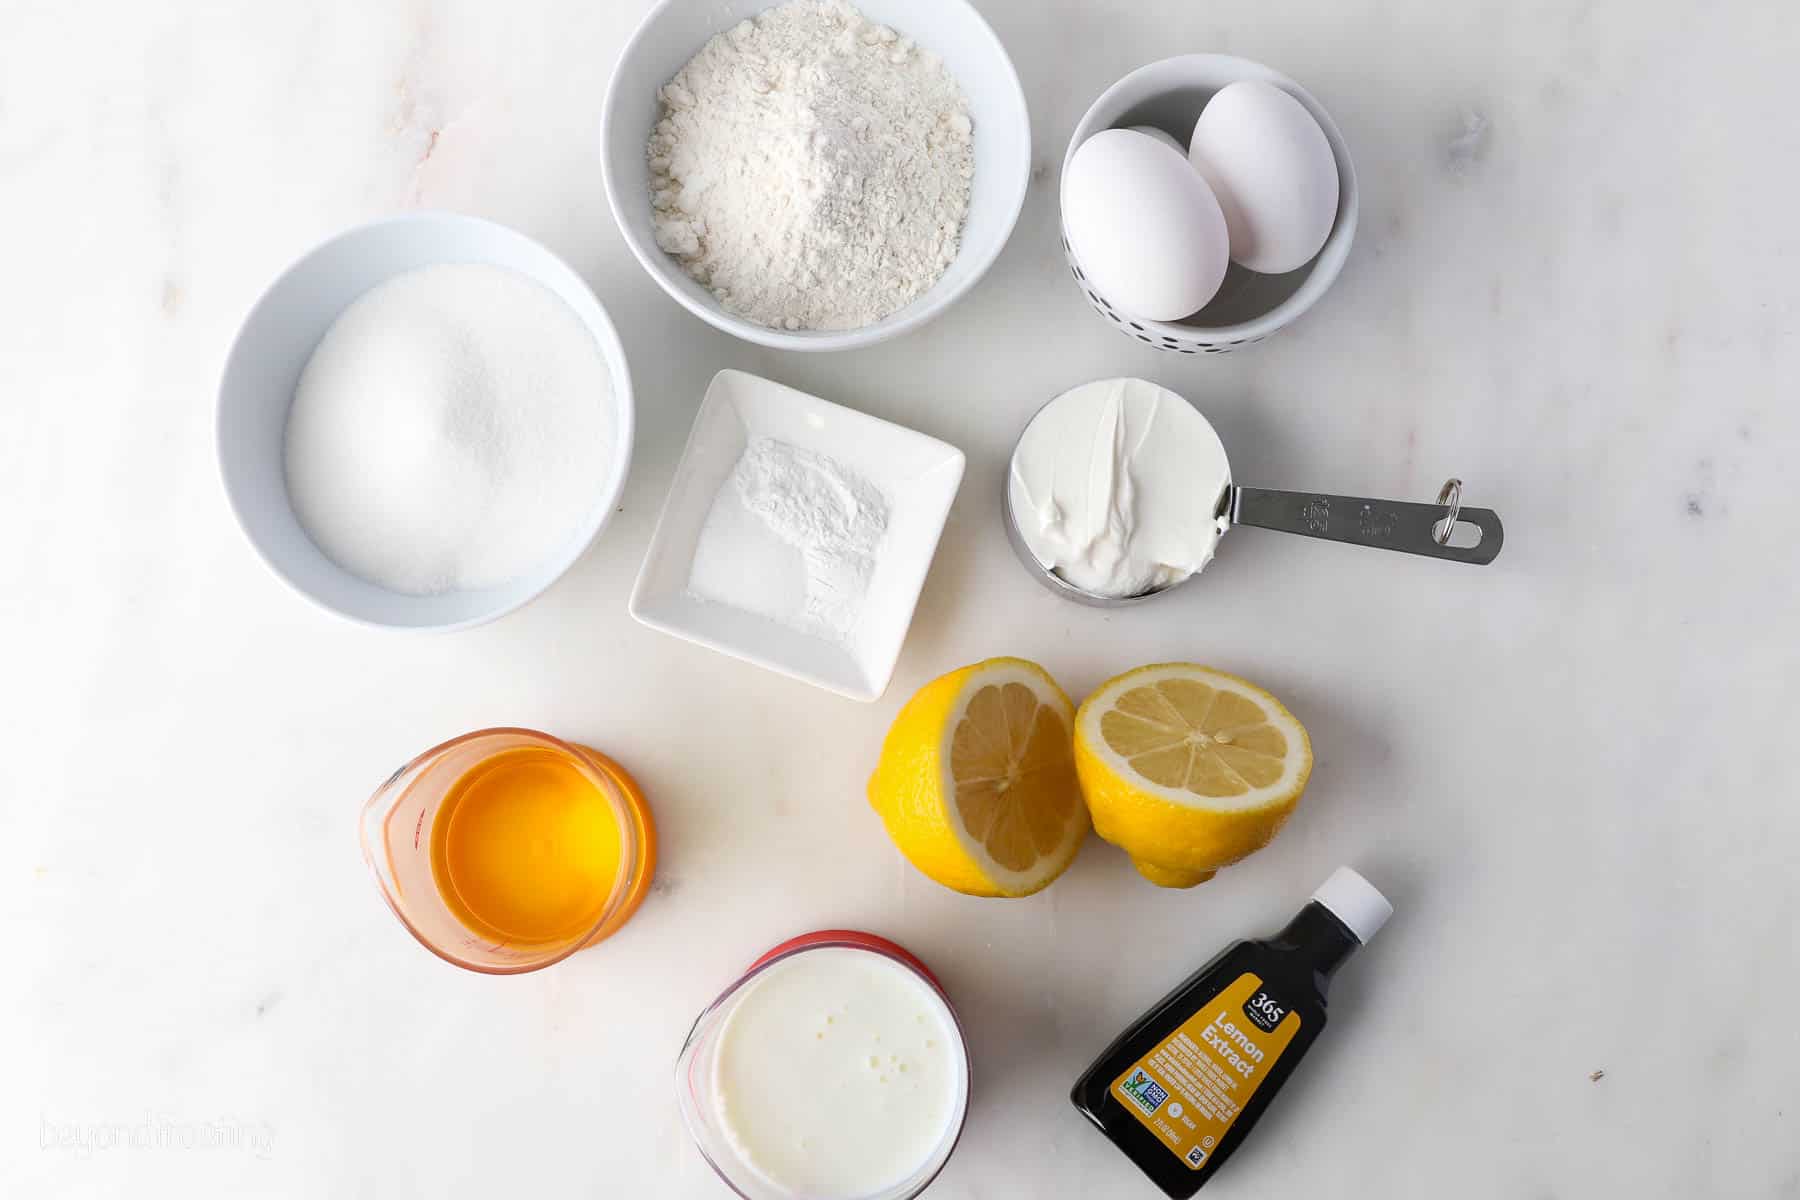 Ingredients for Lemon Cupcakes portions out in bowls and dishes